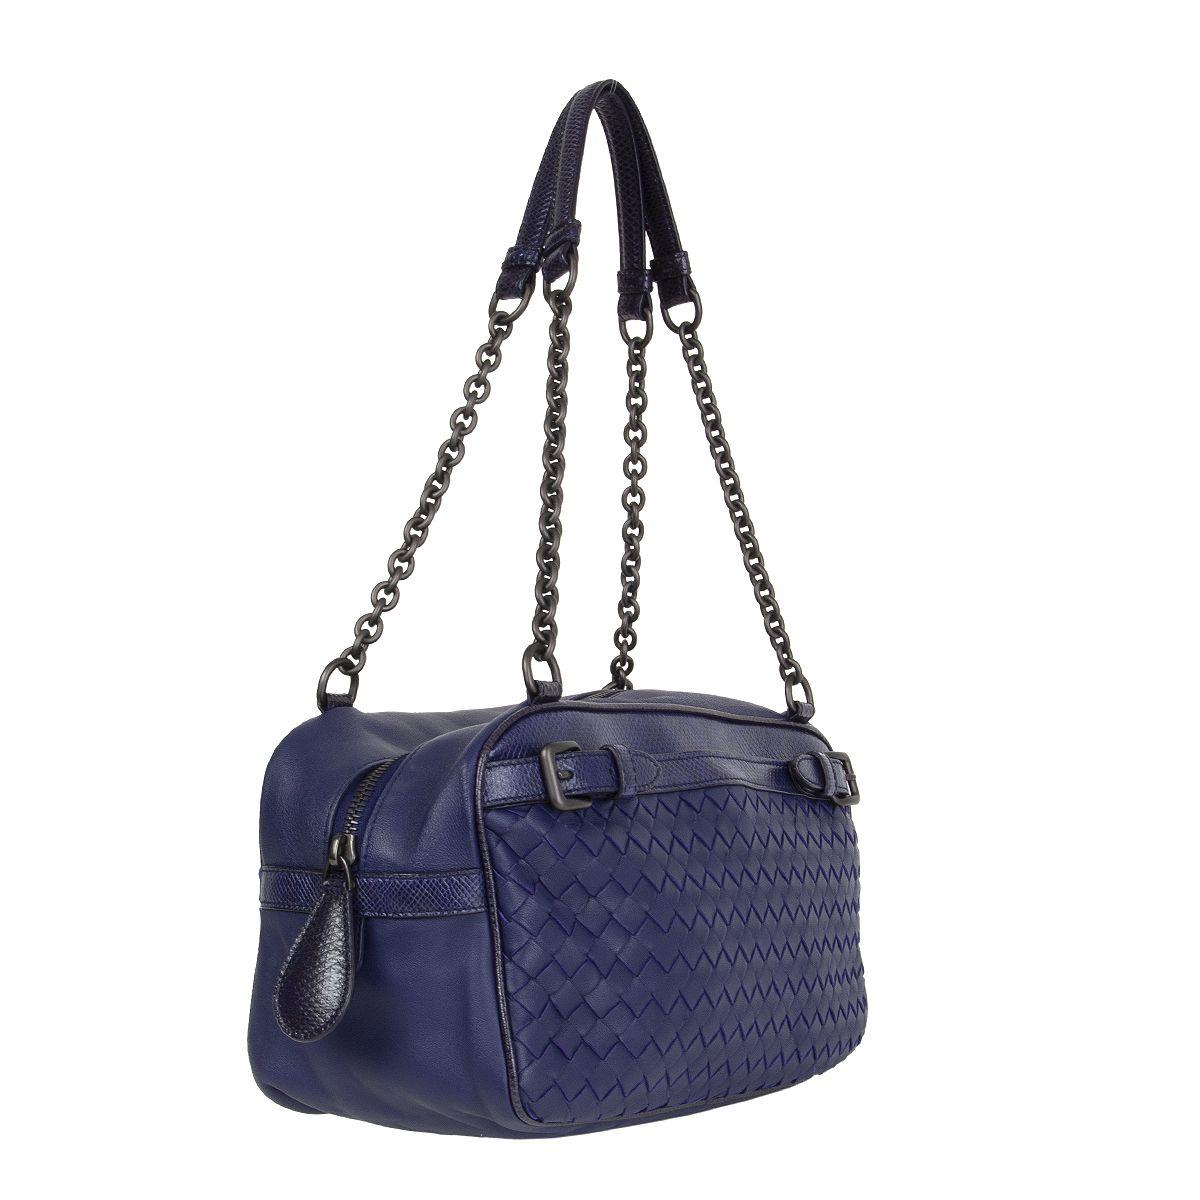 100% authentic Bottega Veneta shoulder bag in deep purple Intrecciato lambskin featuring karung snakeskin details. Front pocket with magnetic closure and two decorative buckles on the side. Opens with a zipper on top and is lined in dark taupe